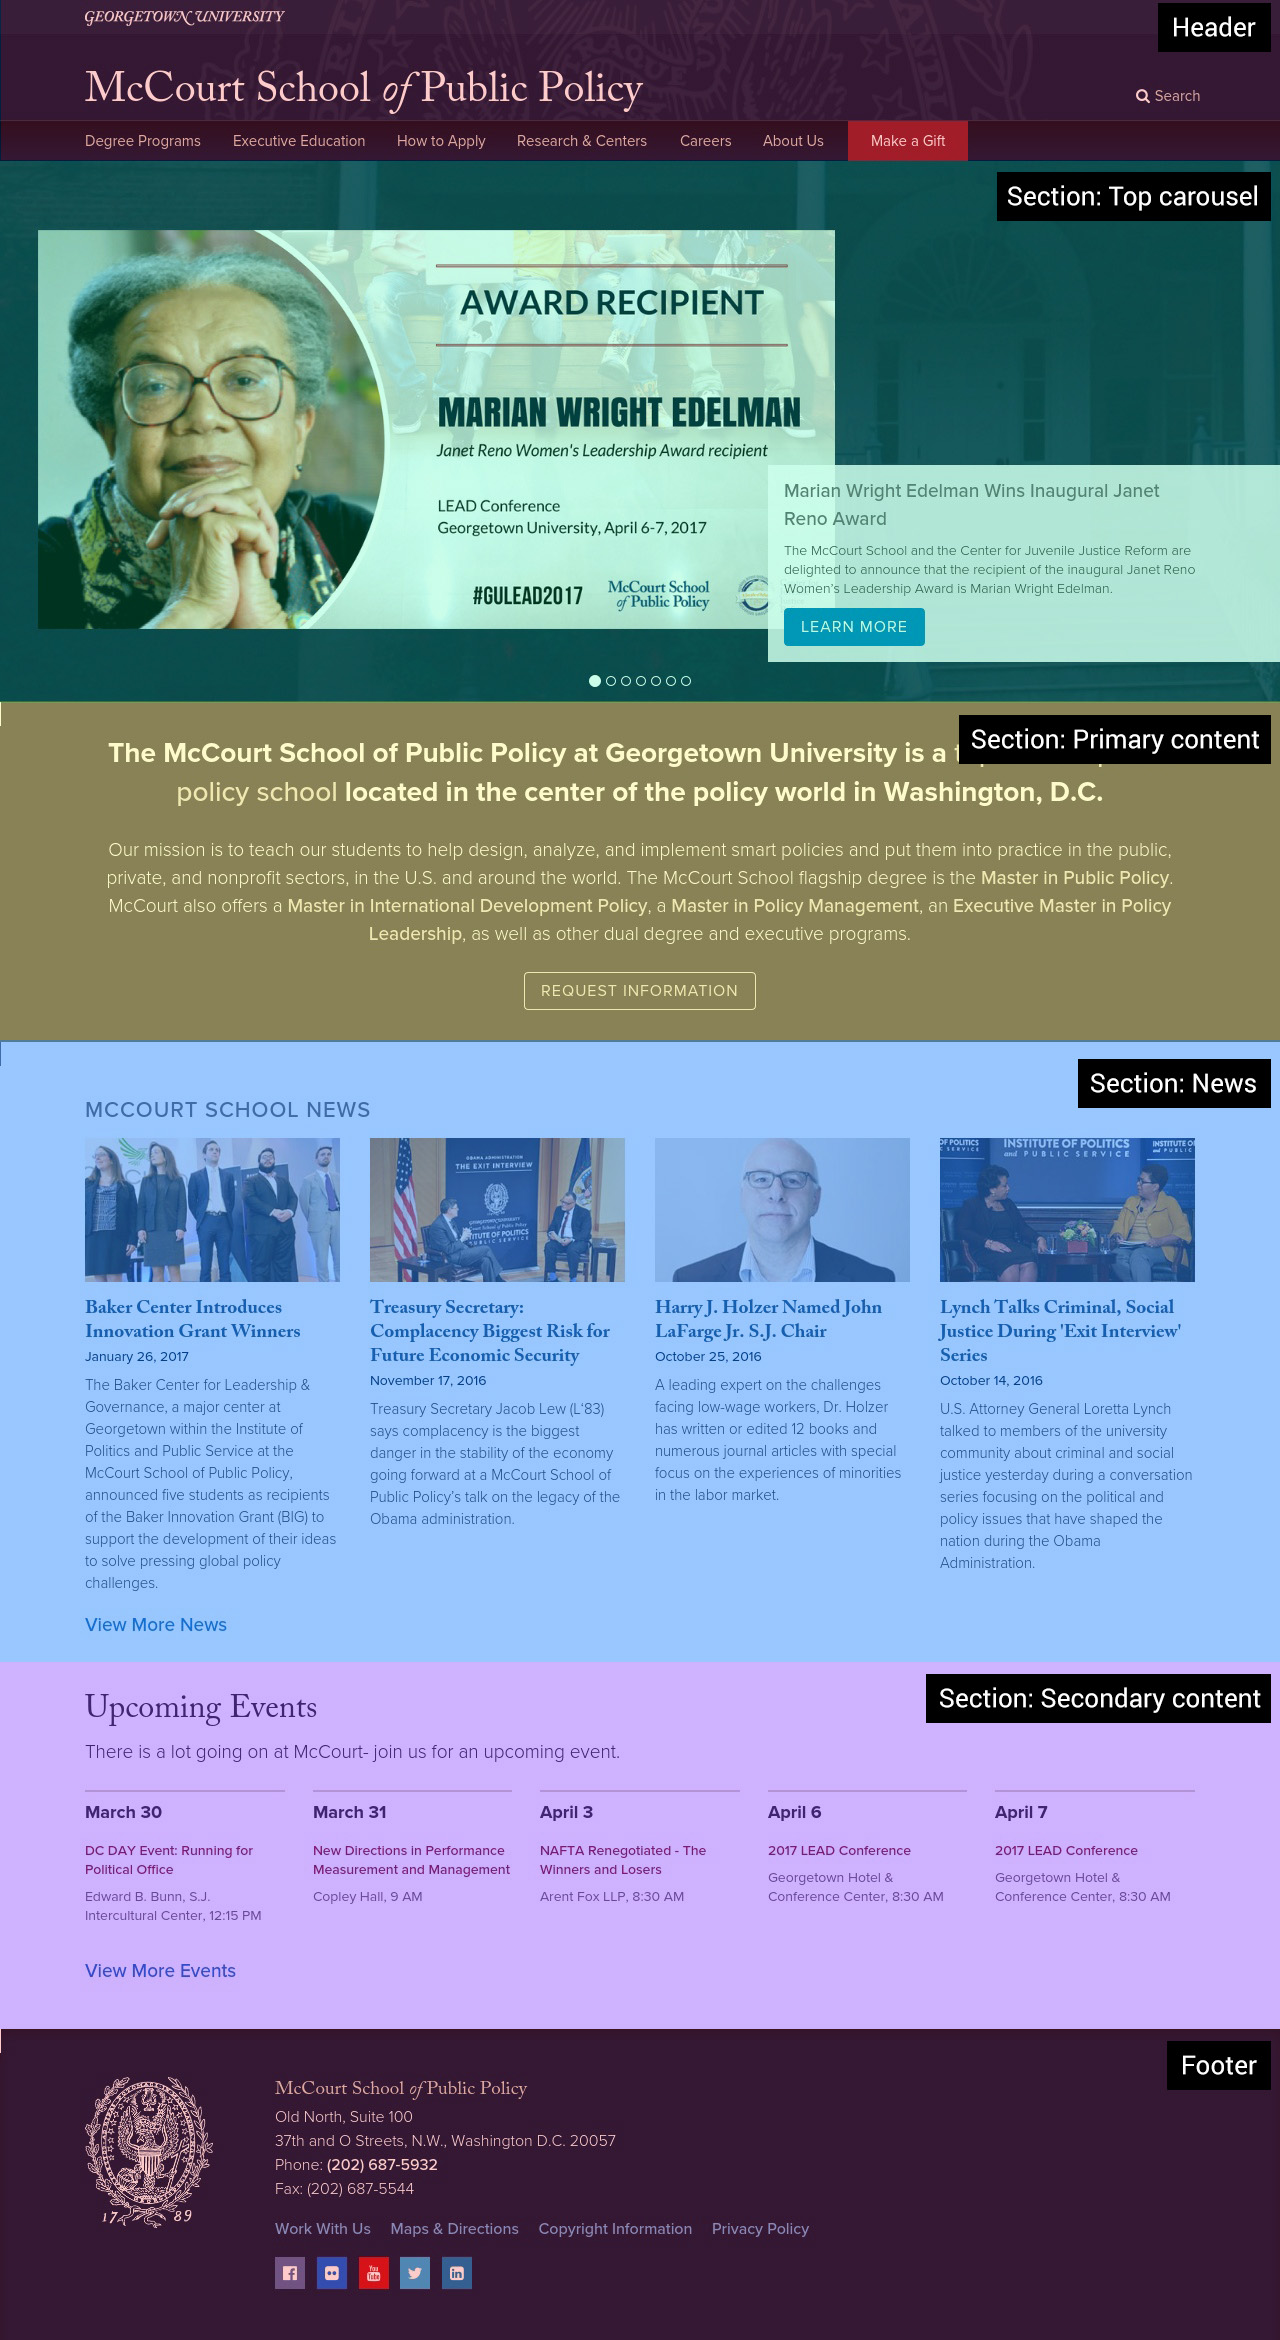 An example of how we identified landmarks on the McCourt School of Public Policy home page.